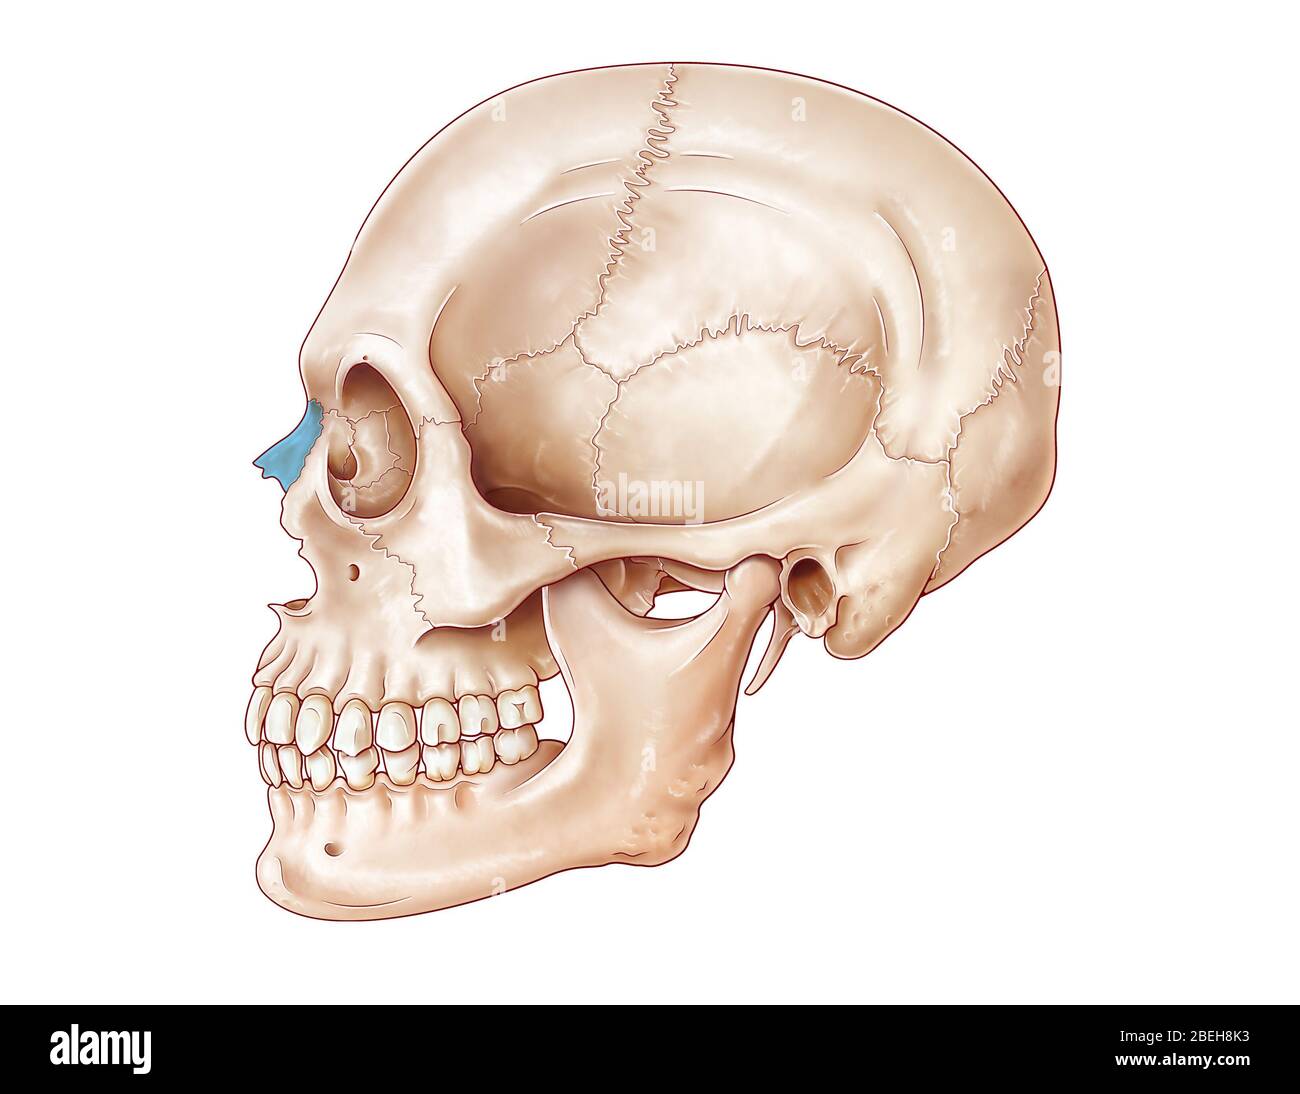 An Illustration Of The Human Skull From A Lateral View With The Nasal Bone Highlighted In Blue Stock Photo Alamy